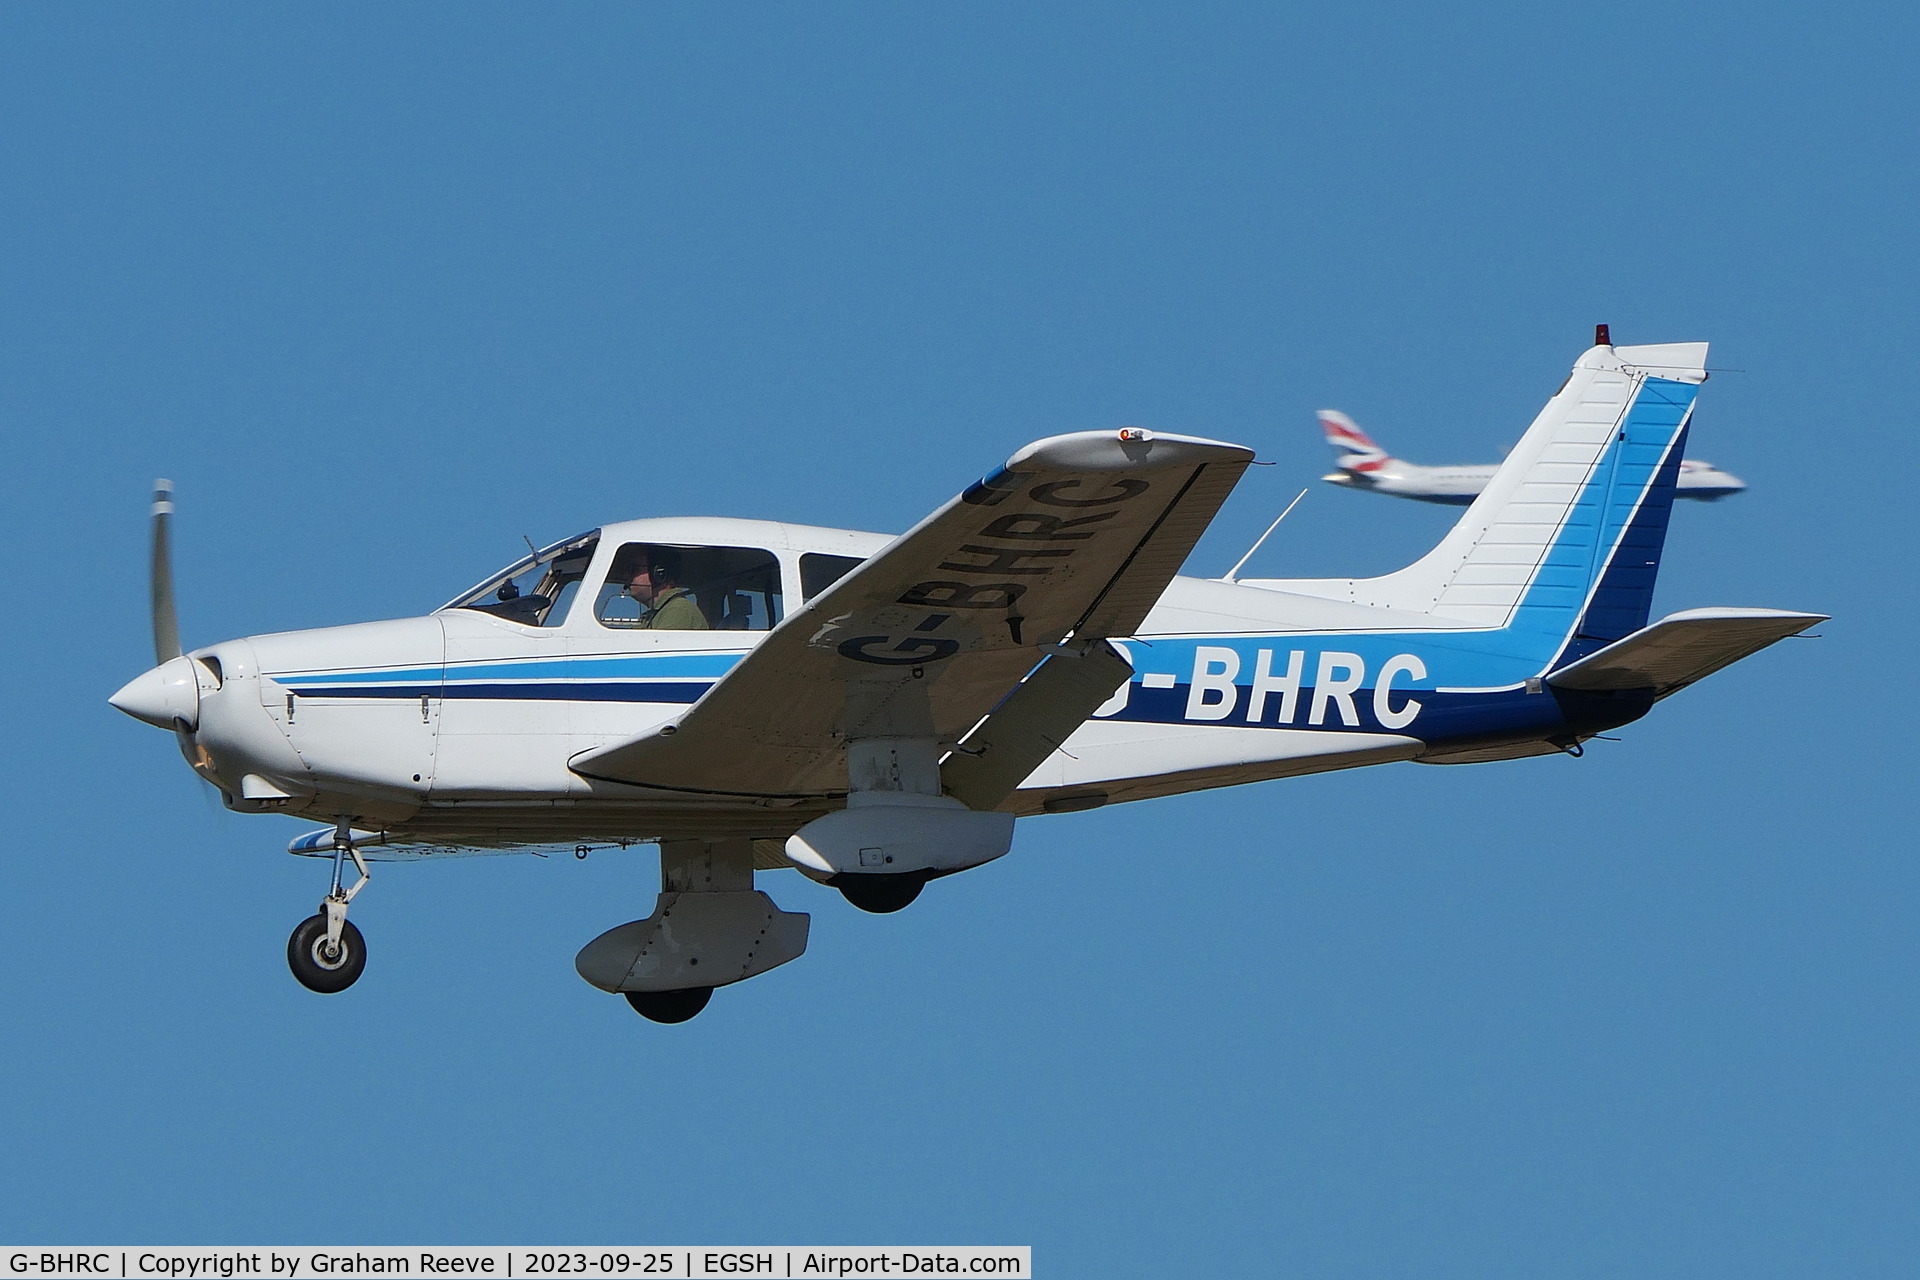 G-BHRC, 1979 Piper PA-28-161 Cherokee Warrior II C/N 28-7916430, Landing at Norwich.